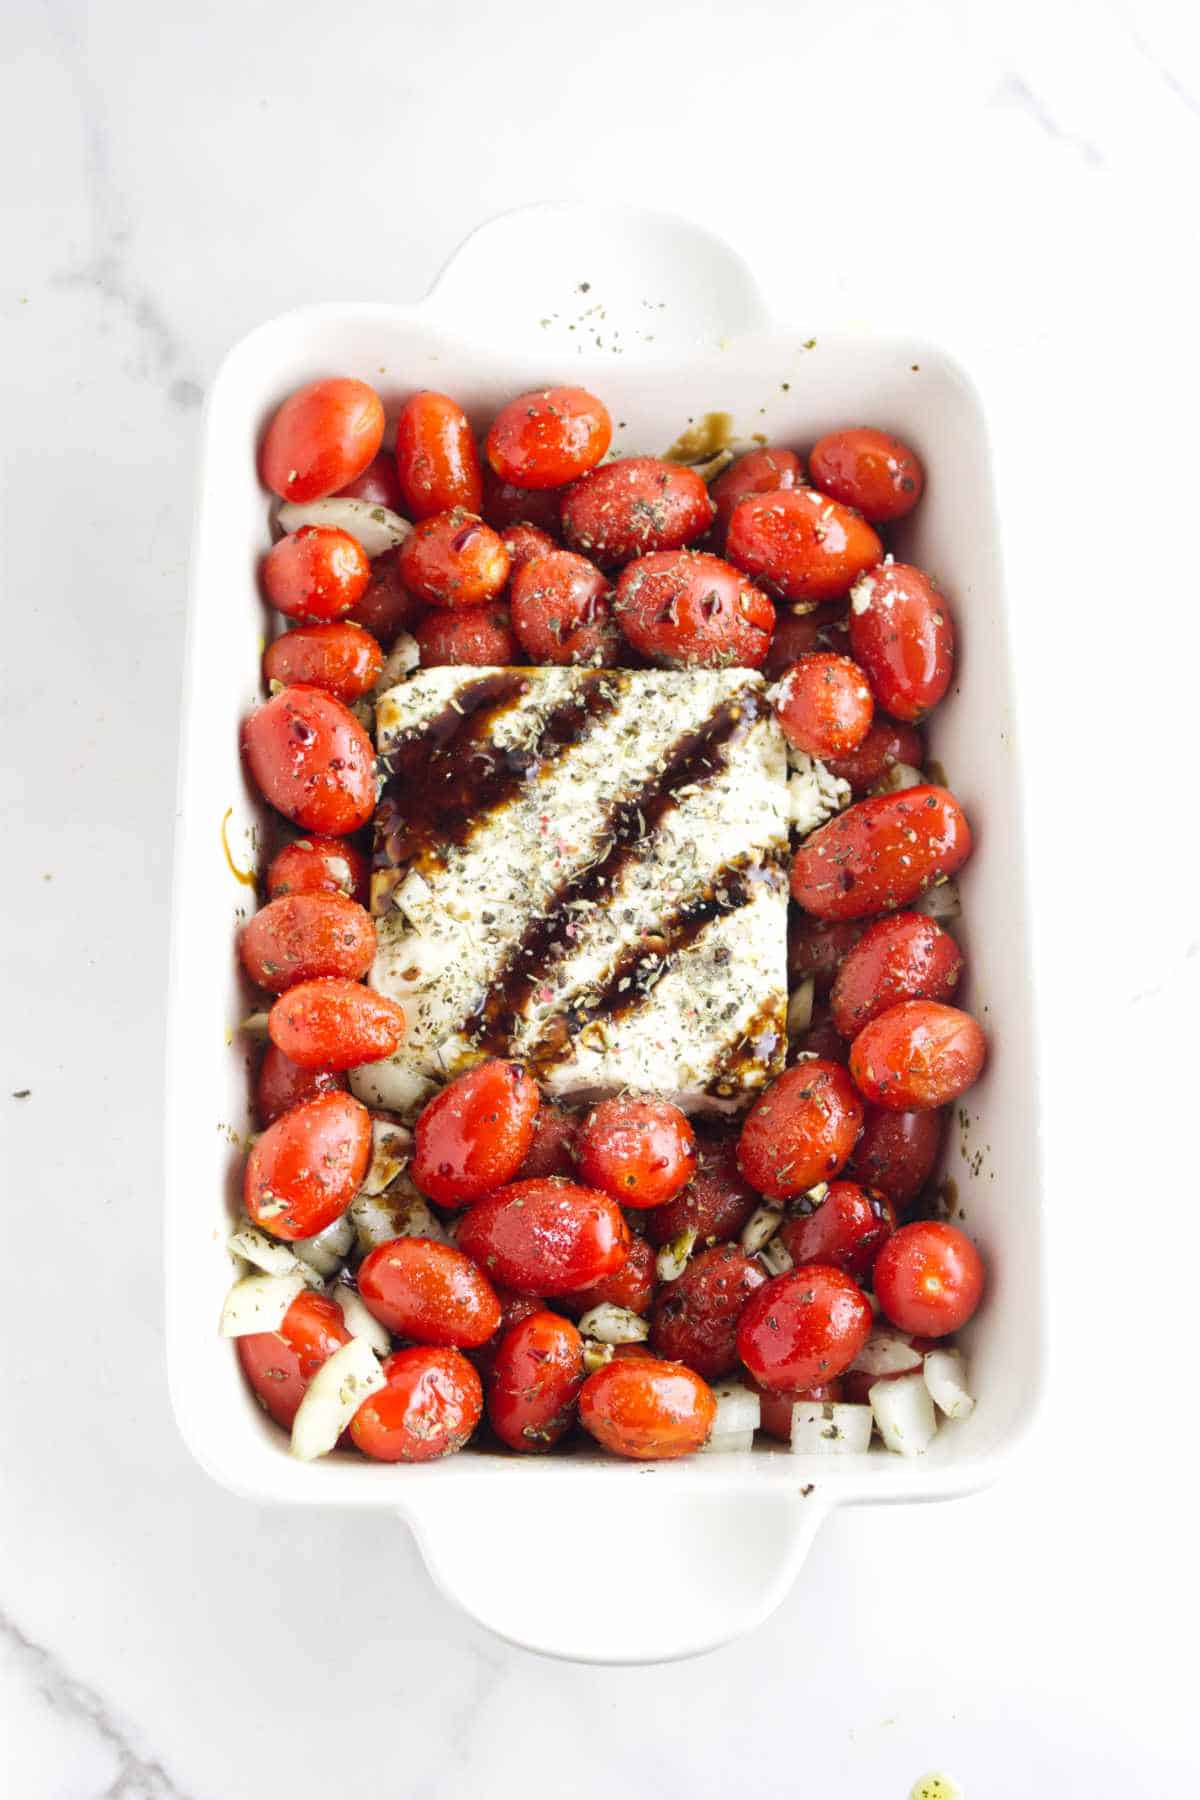 feta cheese with balsamic drizzle in the middle of a baking dish of cherry tomatoes.